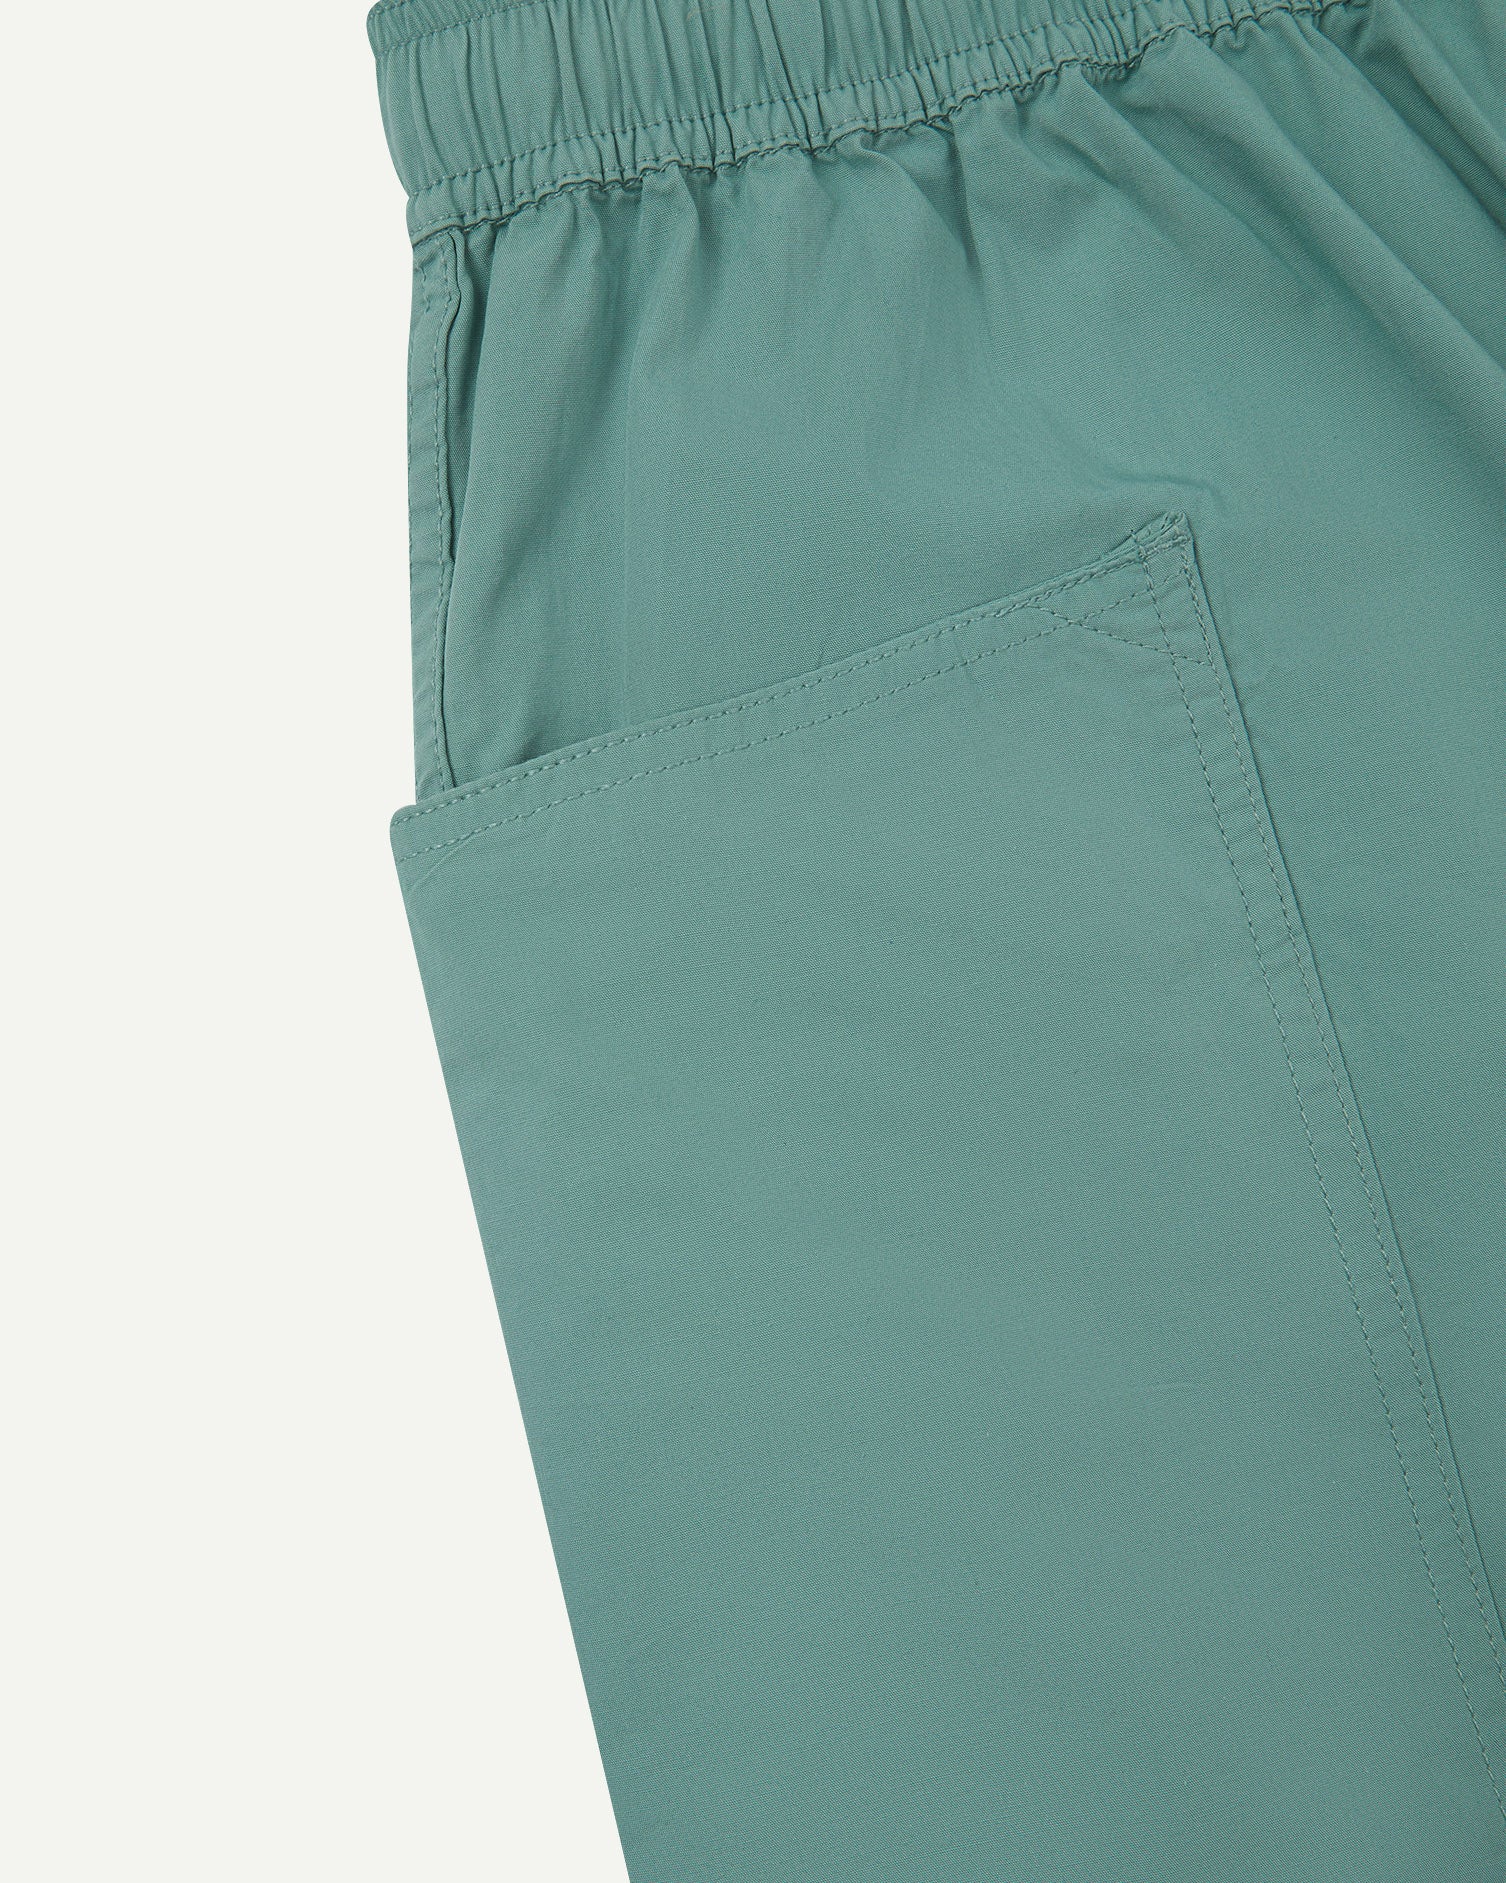 Close-up view of eucalyptus green organic cotton #5015 lightweight cotton shorts by Uskees showing elasticated waist and deep front pocket.